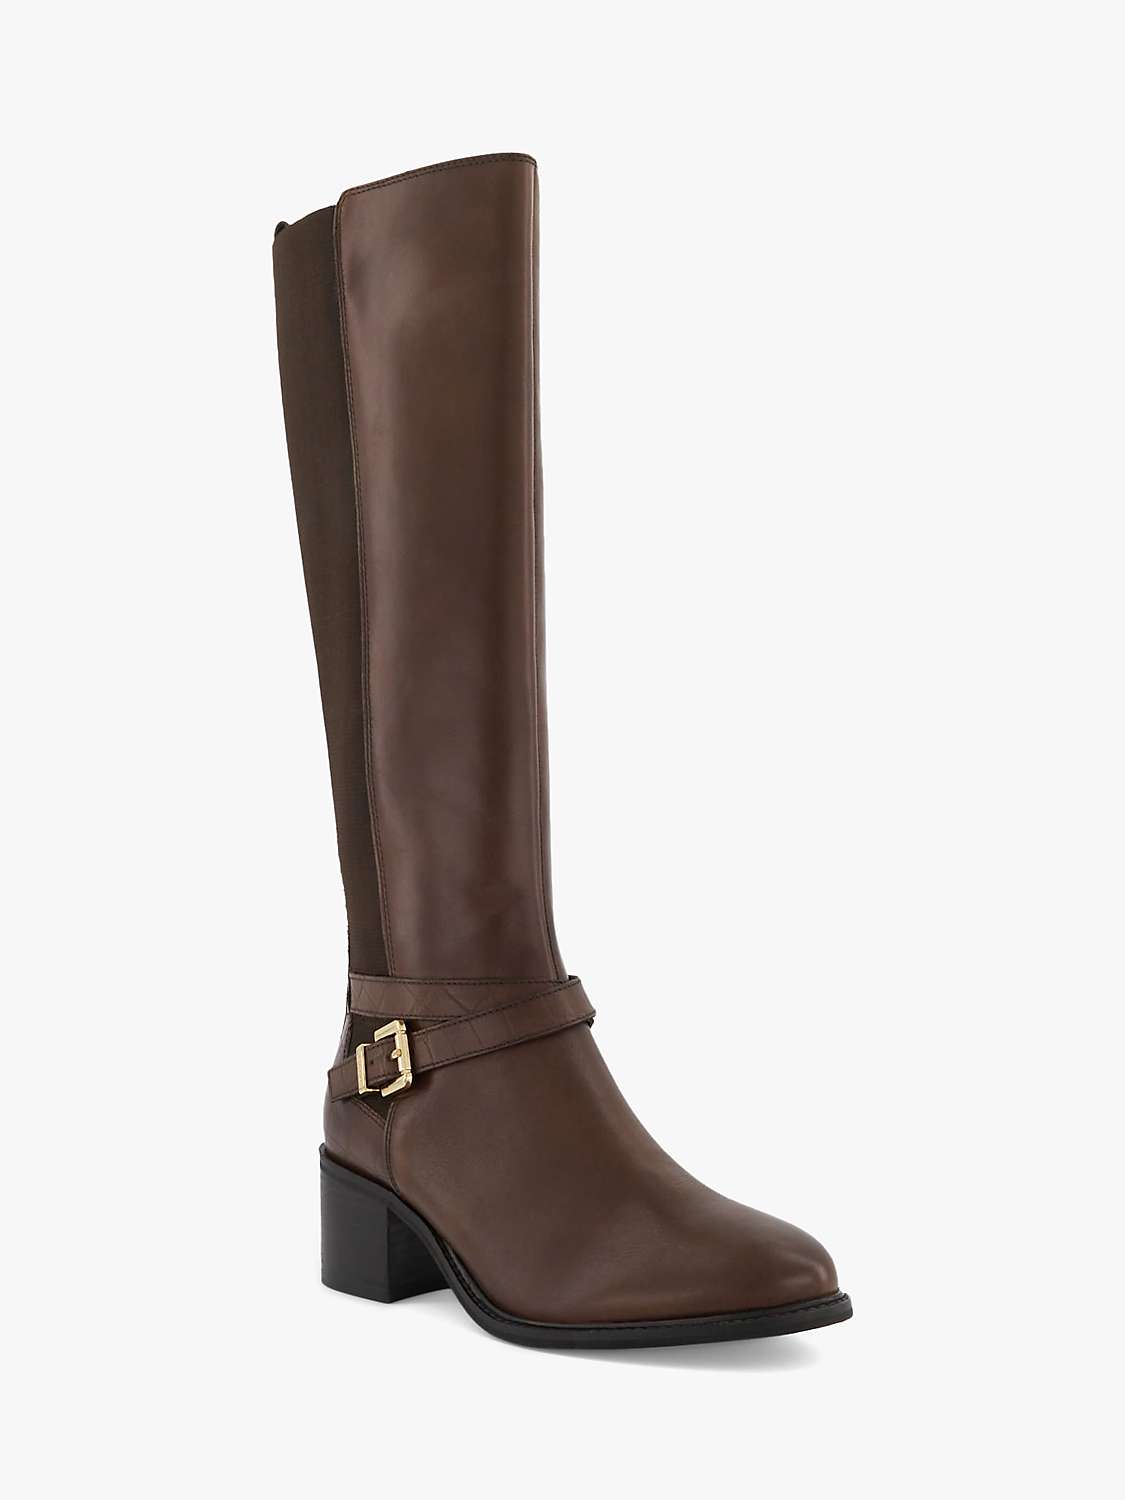 Buy Dune Tildy Leather Knee High Boots, Brown Online at johnlewis.com